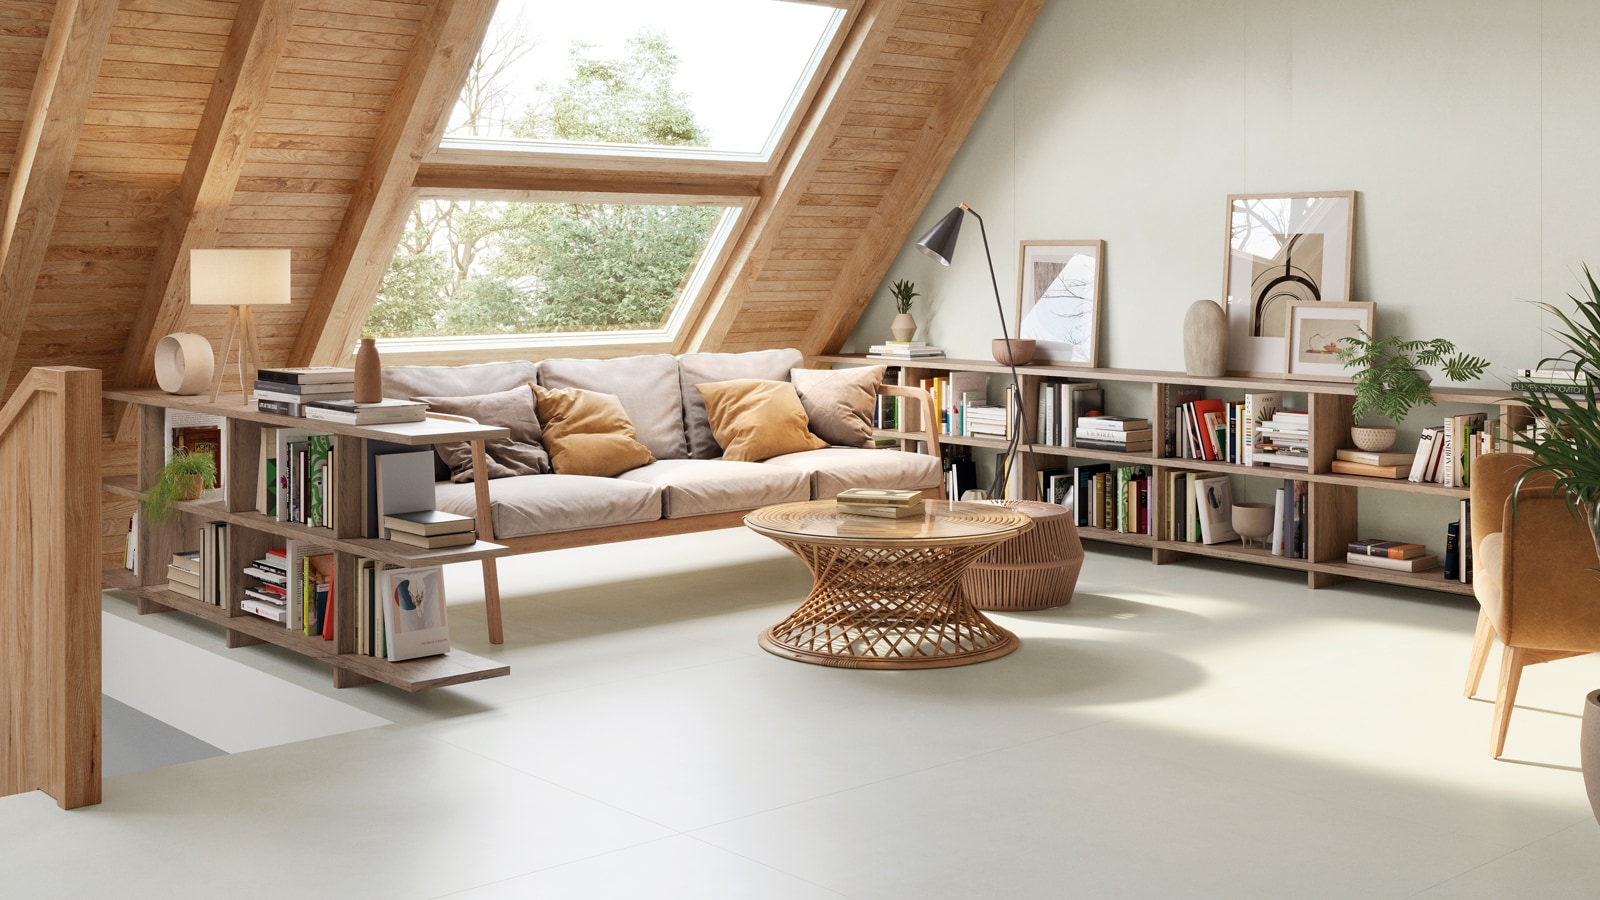 Stuc by XTONE, a neutral collection inspired by sandstone